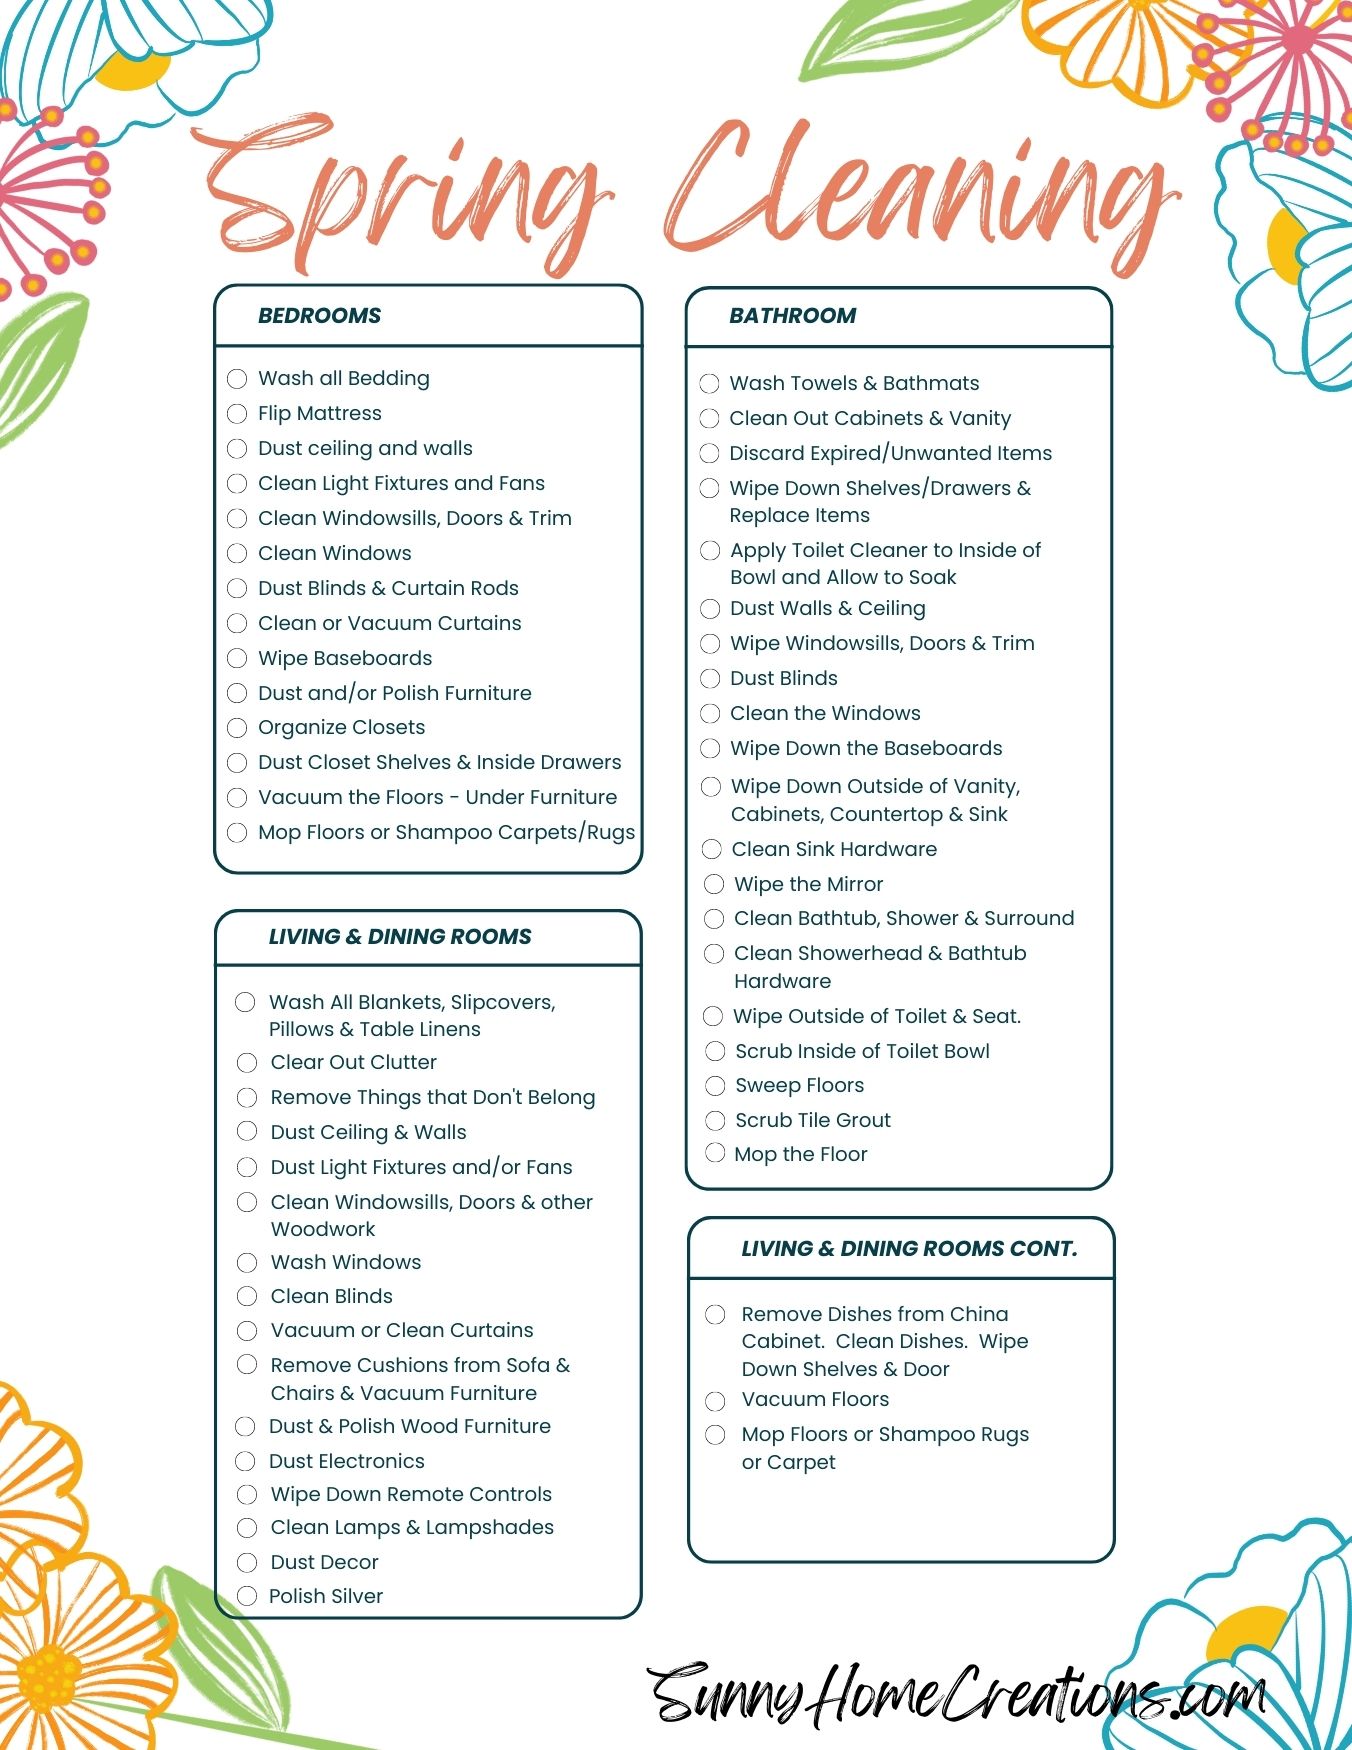 Checklist for spring cleaning bedrooms, bathrooms, living and dining rooms checklist.